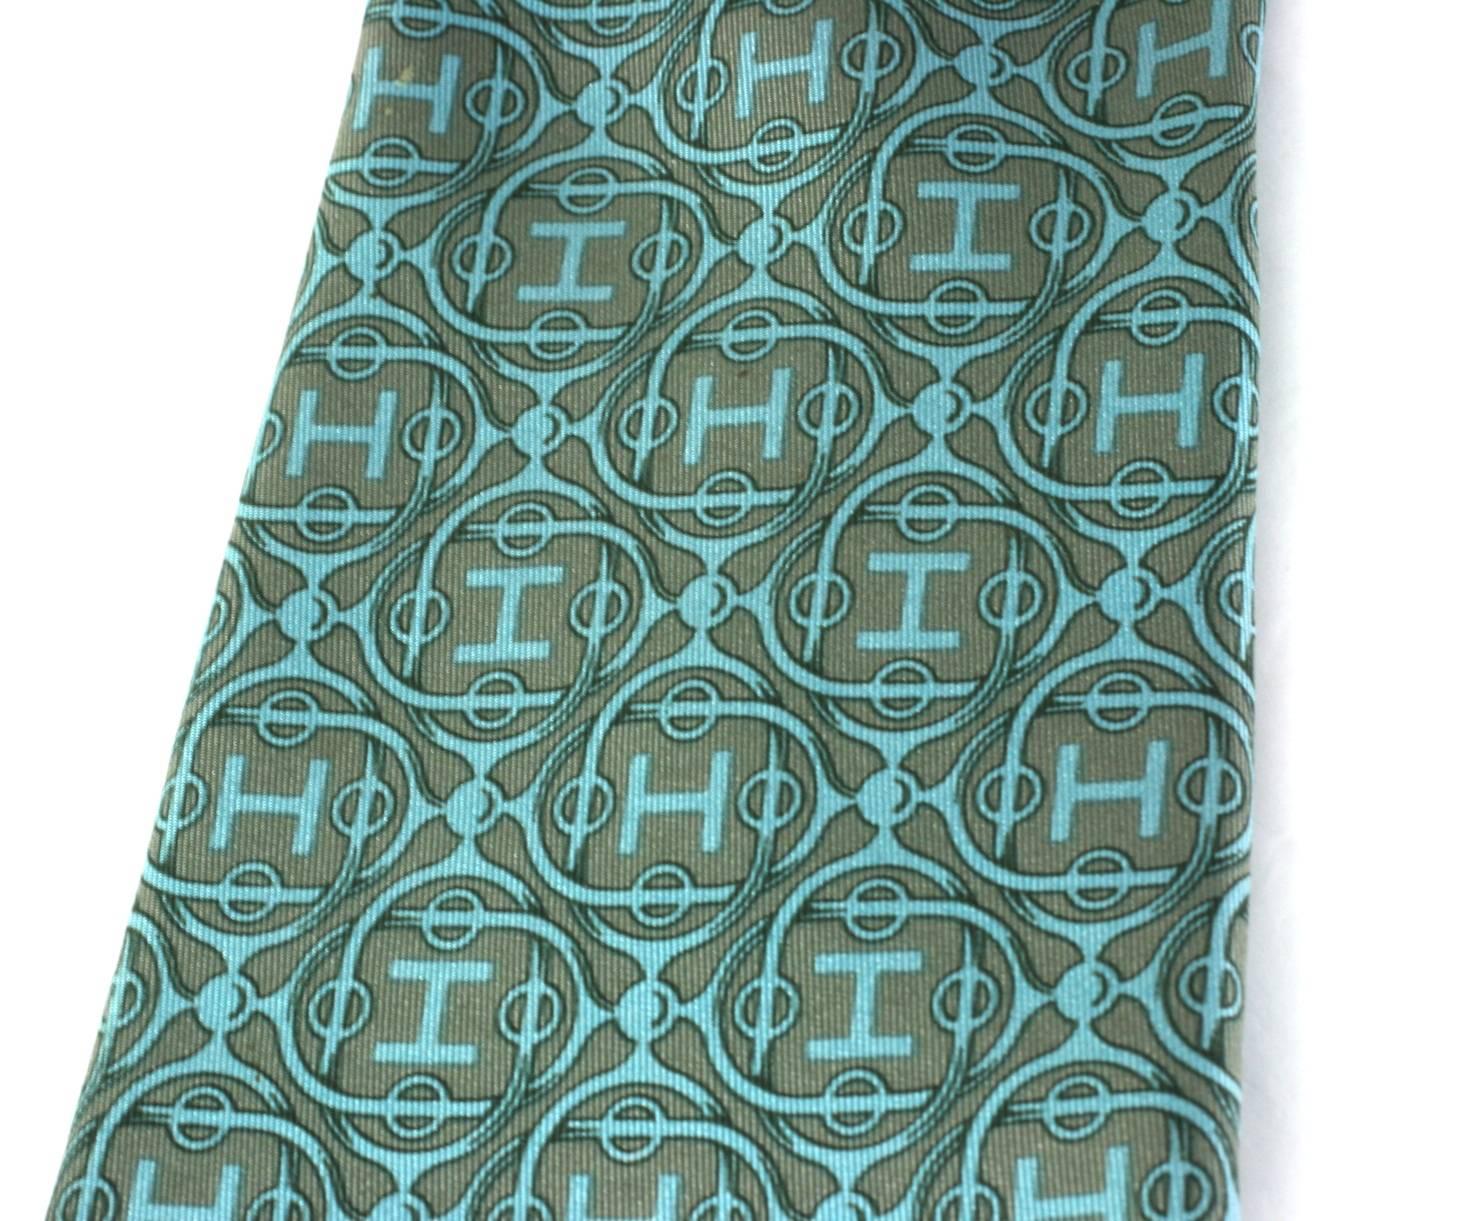 Wide Hermes Logo Print Tie from the 1970's. Excellent condition. 
56" x 4.5" at widest.
